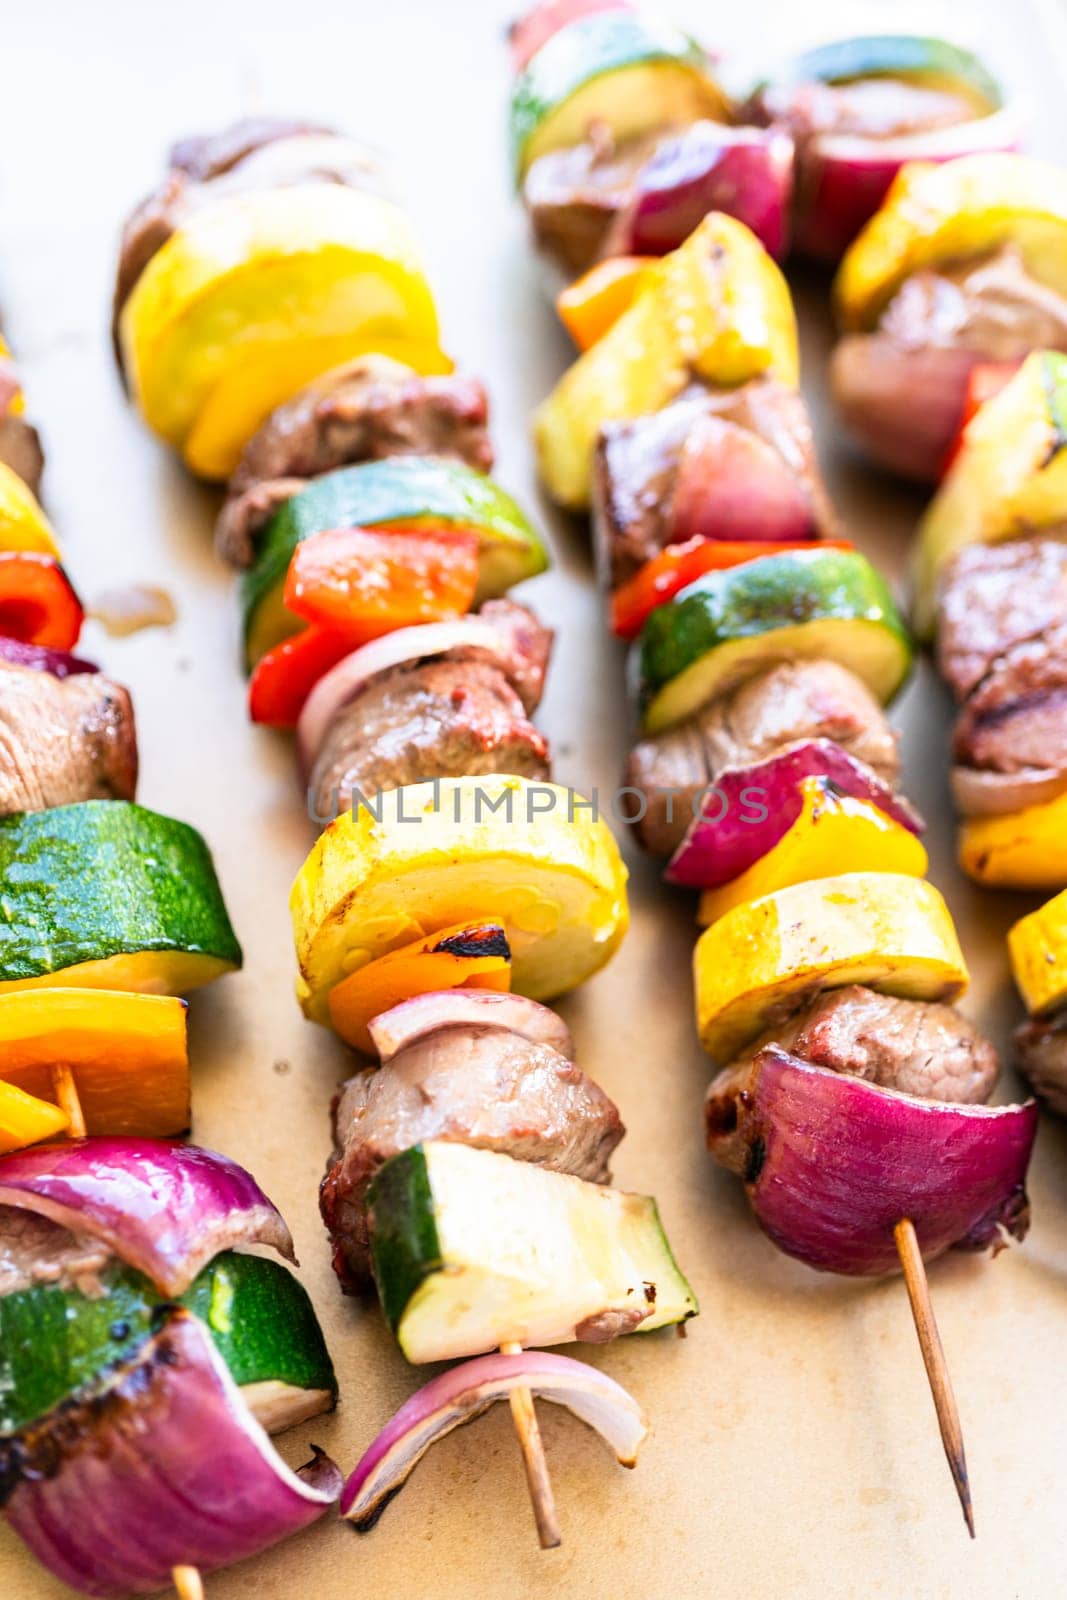 Flavorful beef and colorful veggie skewers, marinated and grilled to perfection, sizzling on a baking sheet.